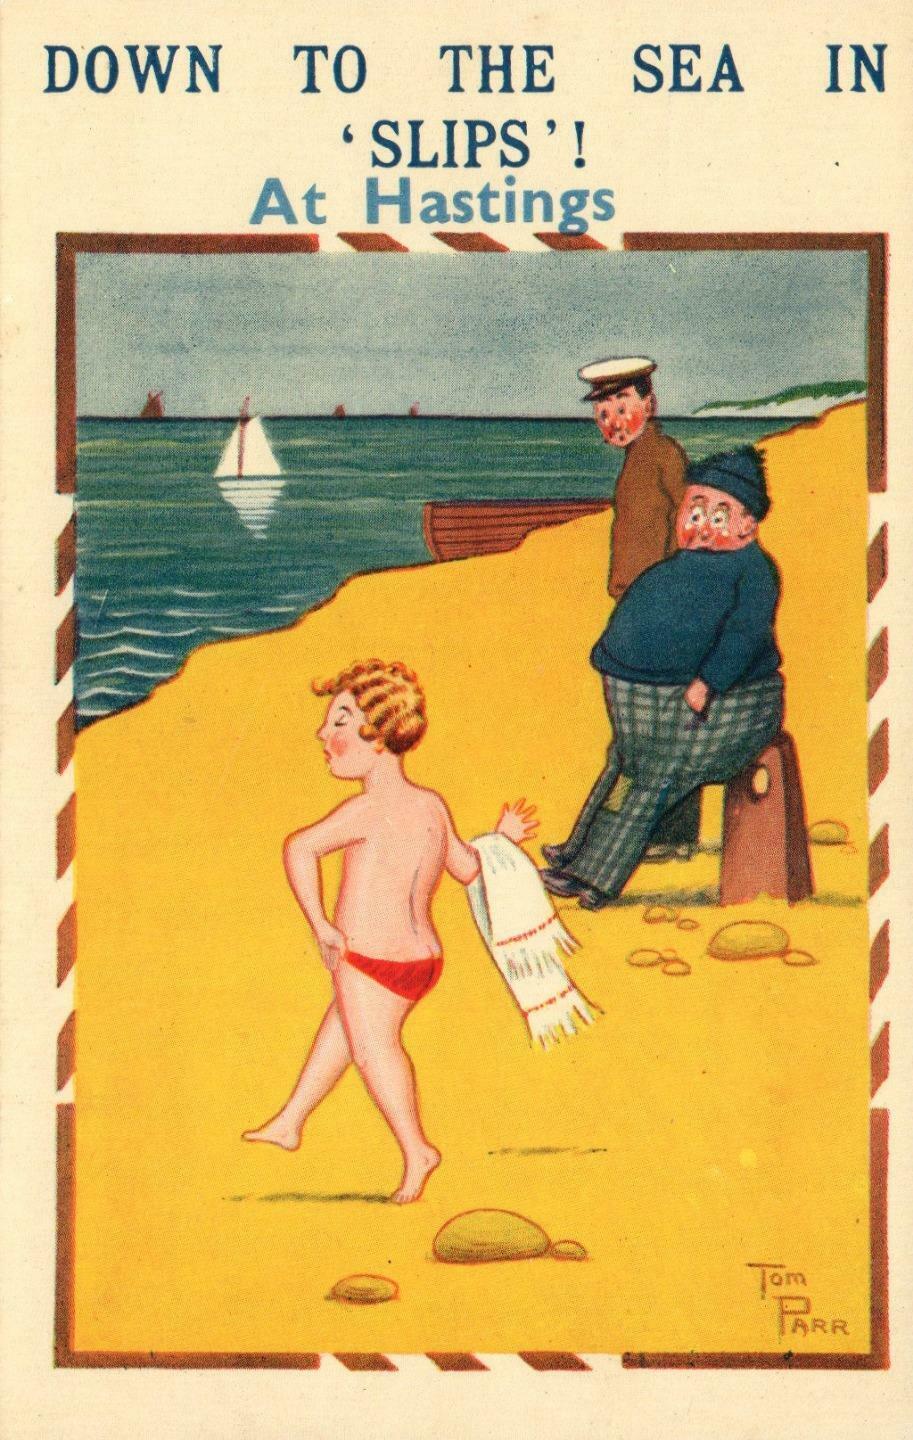 VINTAGE RUDE COMIC Tom Parr Illust DOWN TO THE SEA IN SLIPS AT HASTINGS POSTCARD